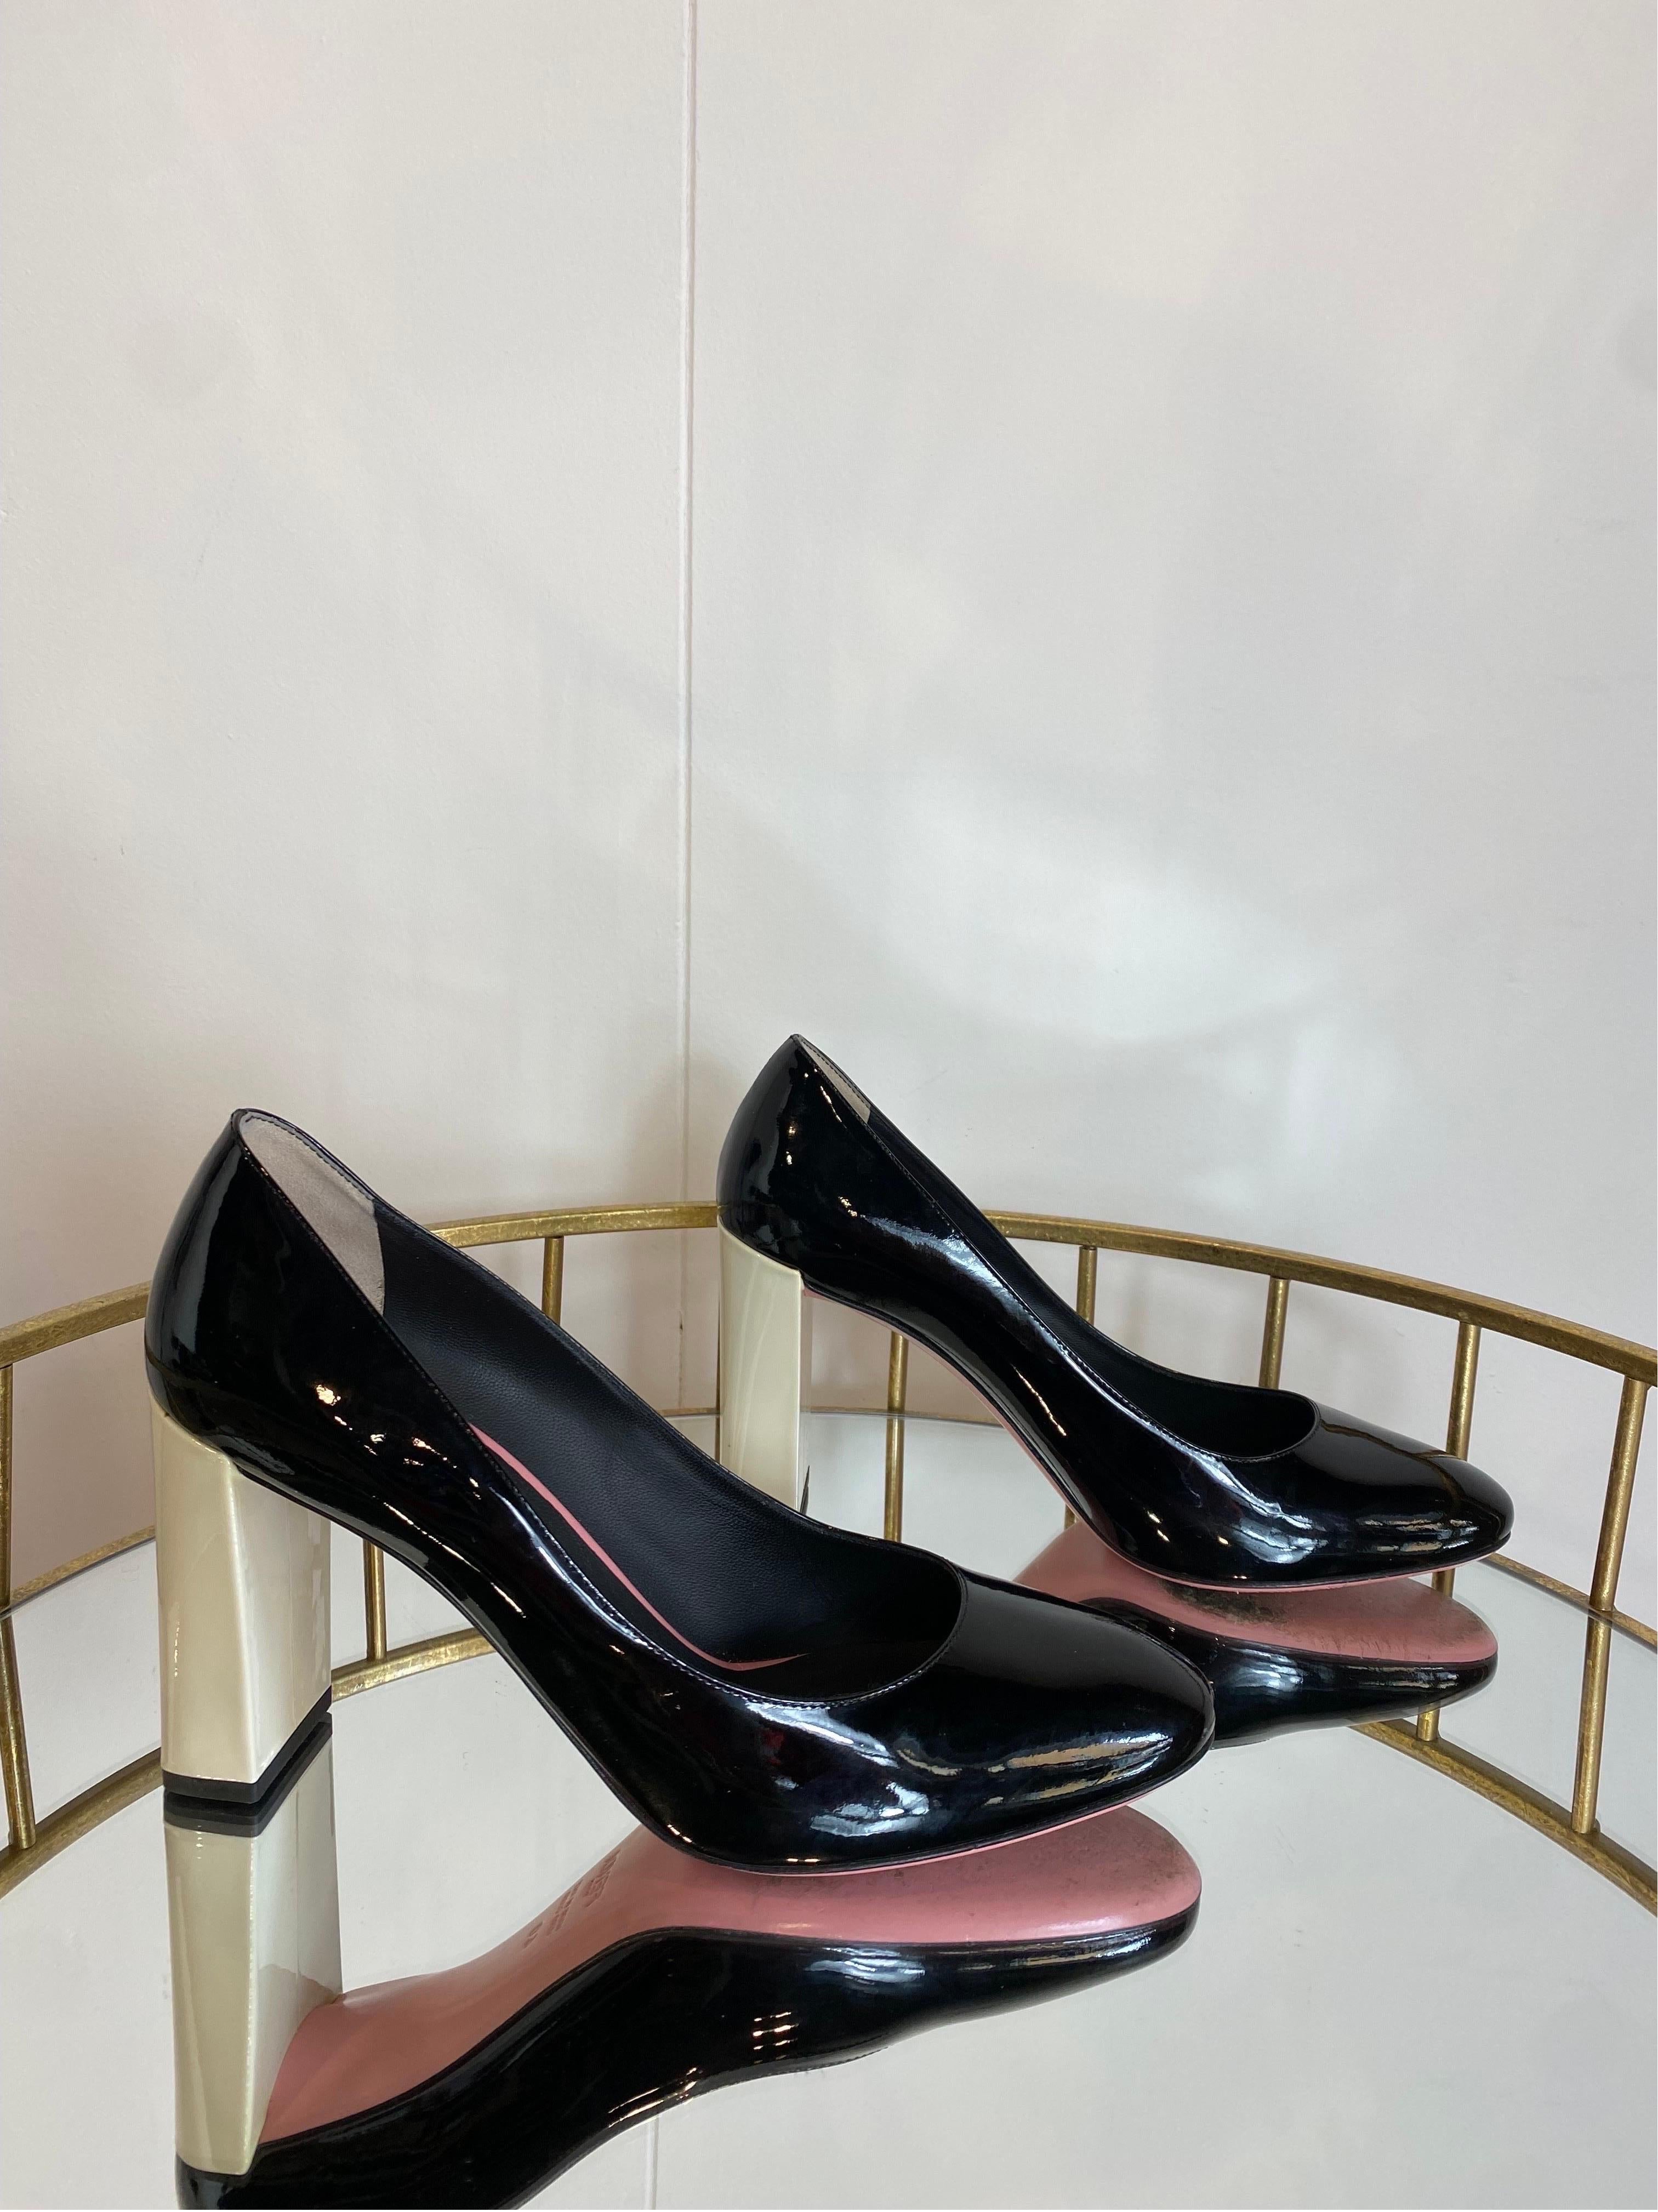 Fendi pumps.
In black patent leather with milky heel detail.
Italian number 40
Inner sole 27 cm
Heel 9 cm
Excellent general condition, with minimal signs of use.
They have original box.
Retail price €490